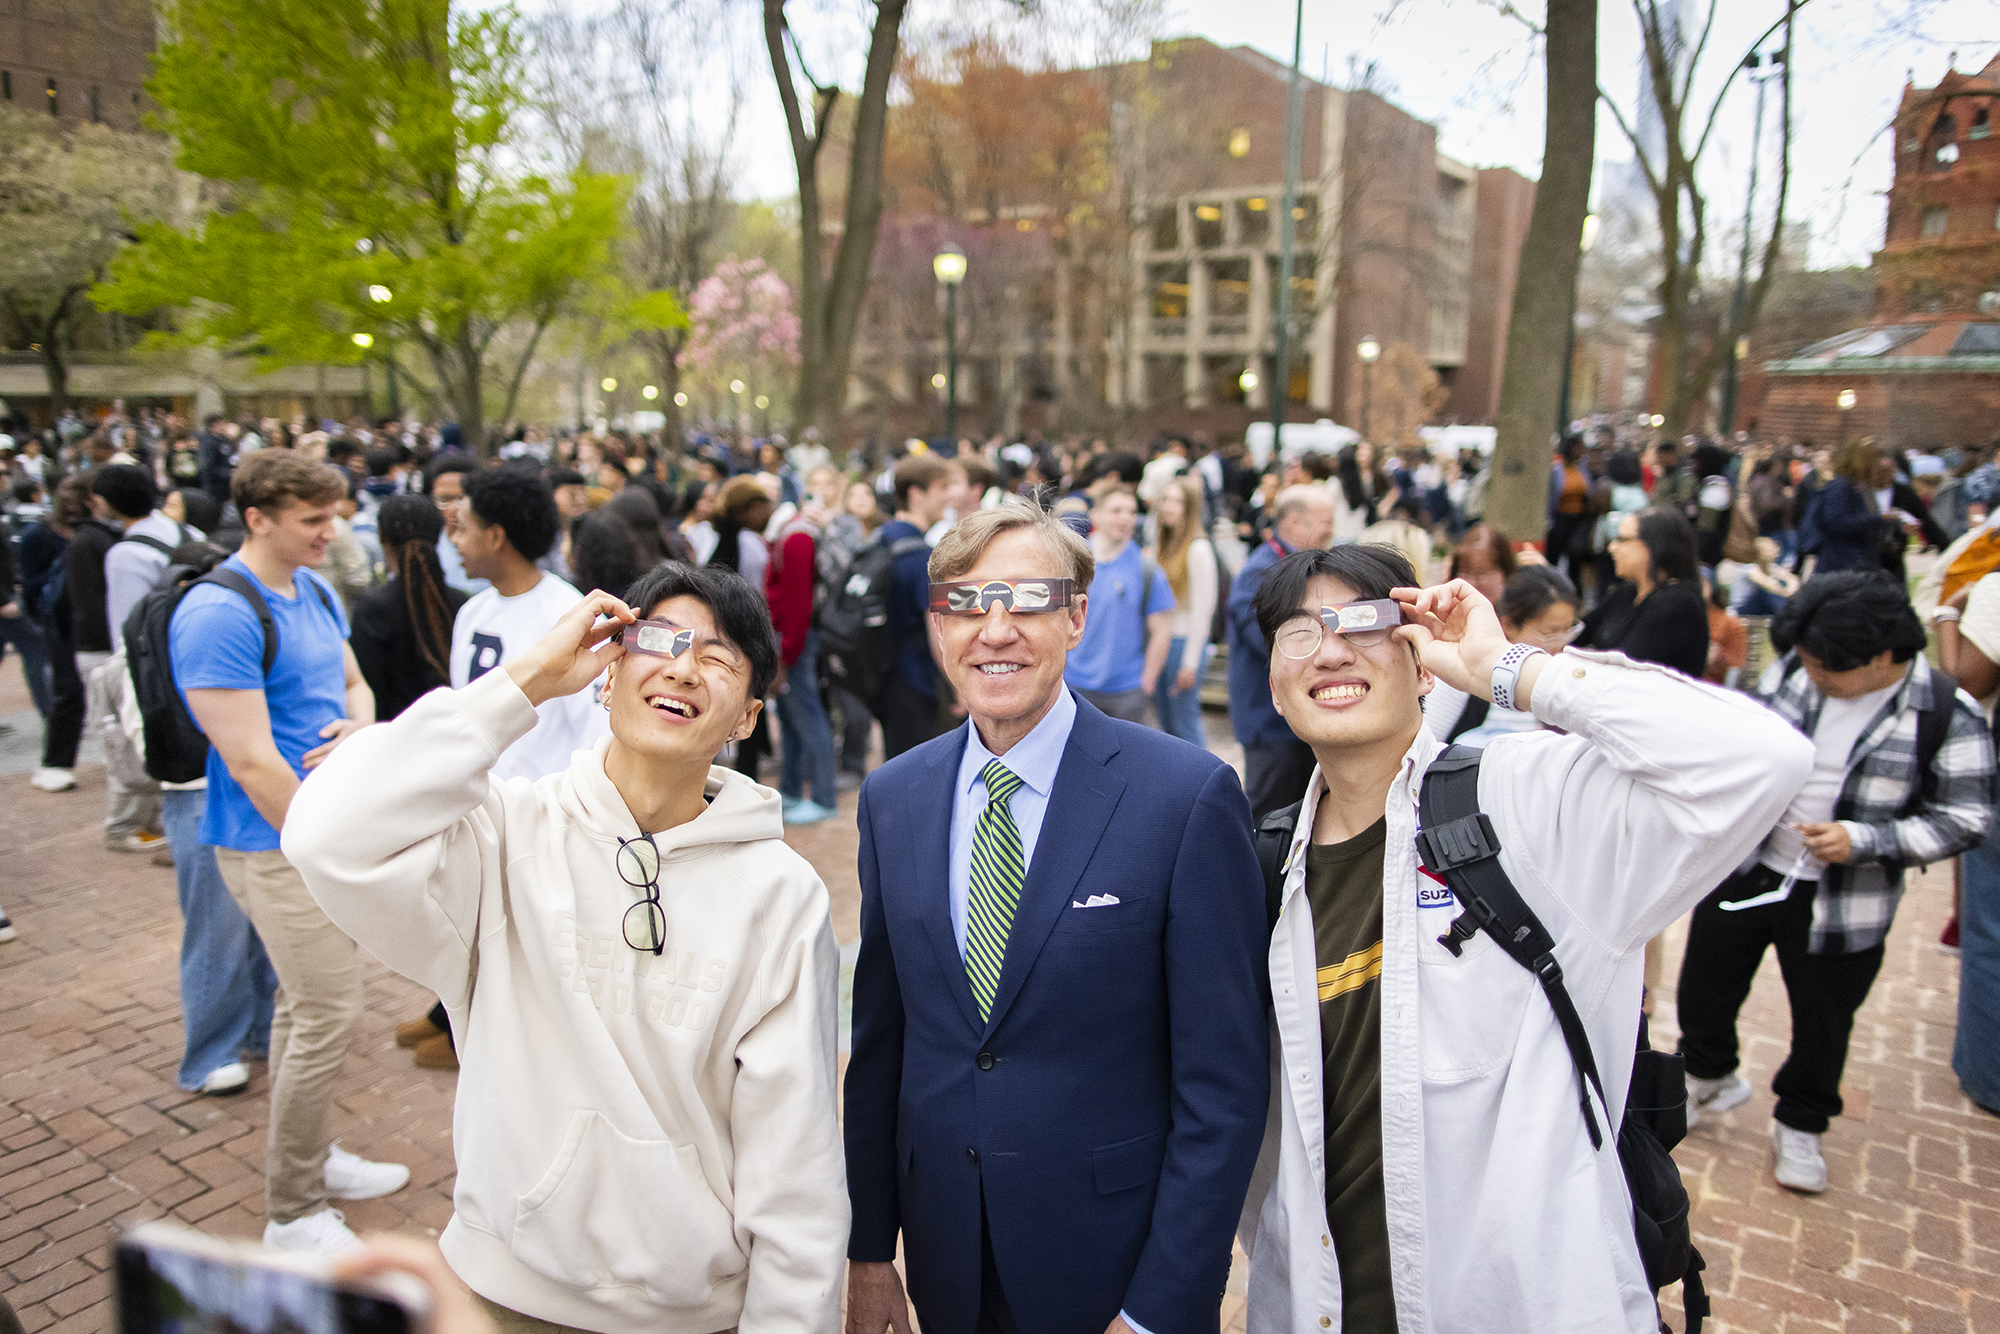 Penn president J. Larry Jameson and other students in eclipse glasses on Locust Walk during the solar eclipse.